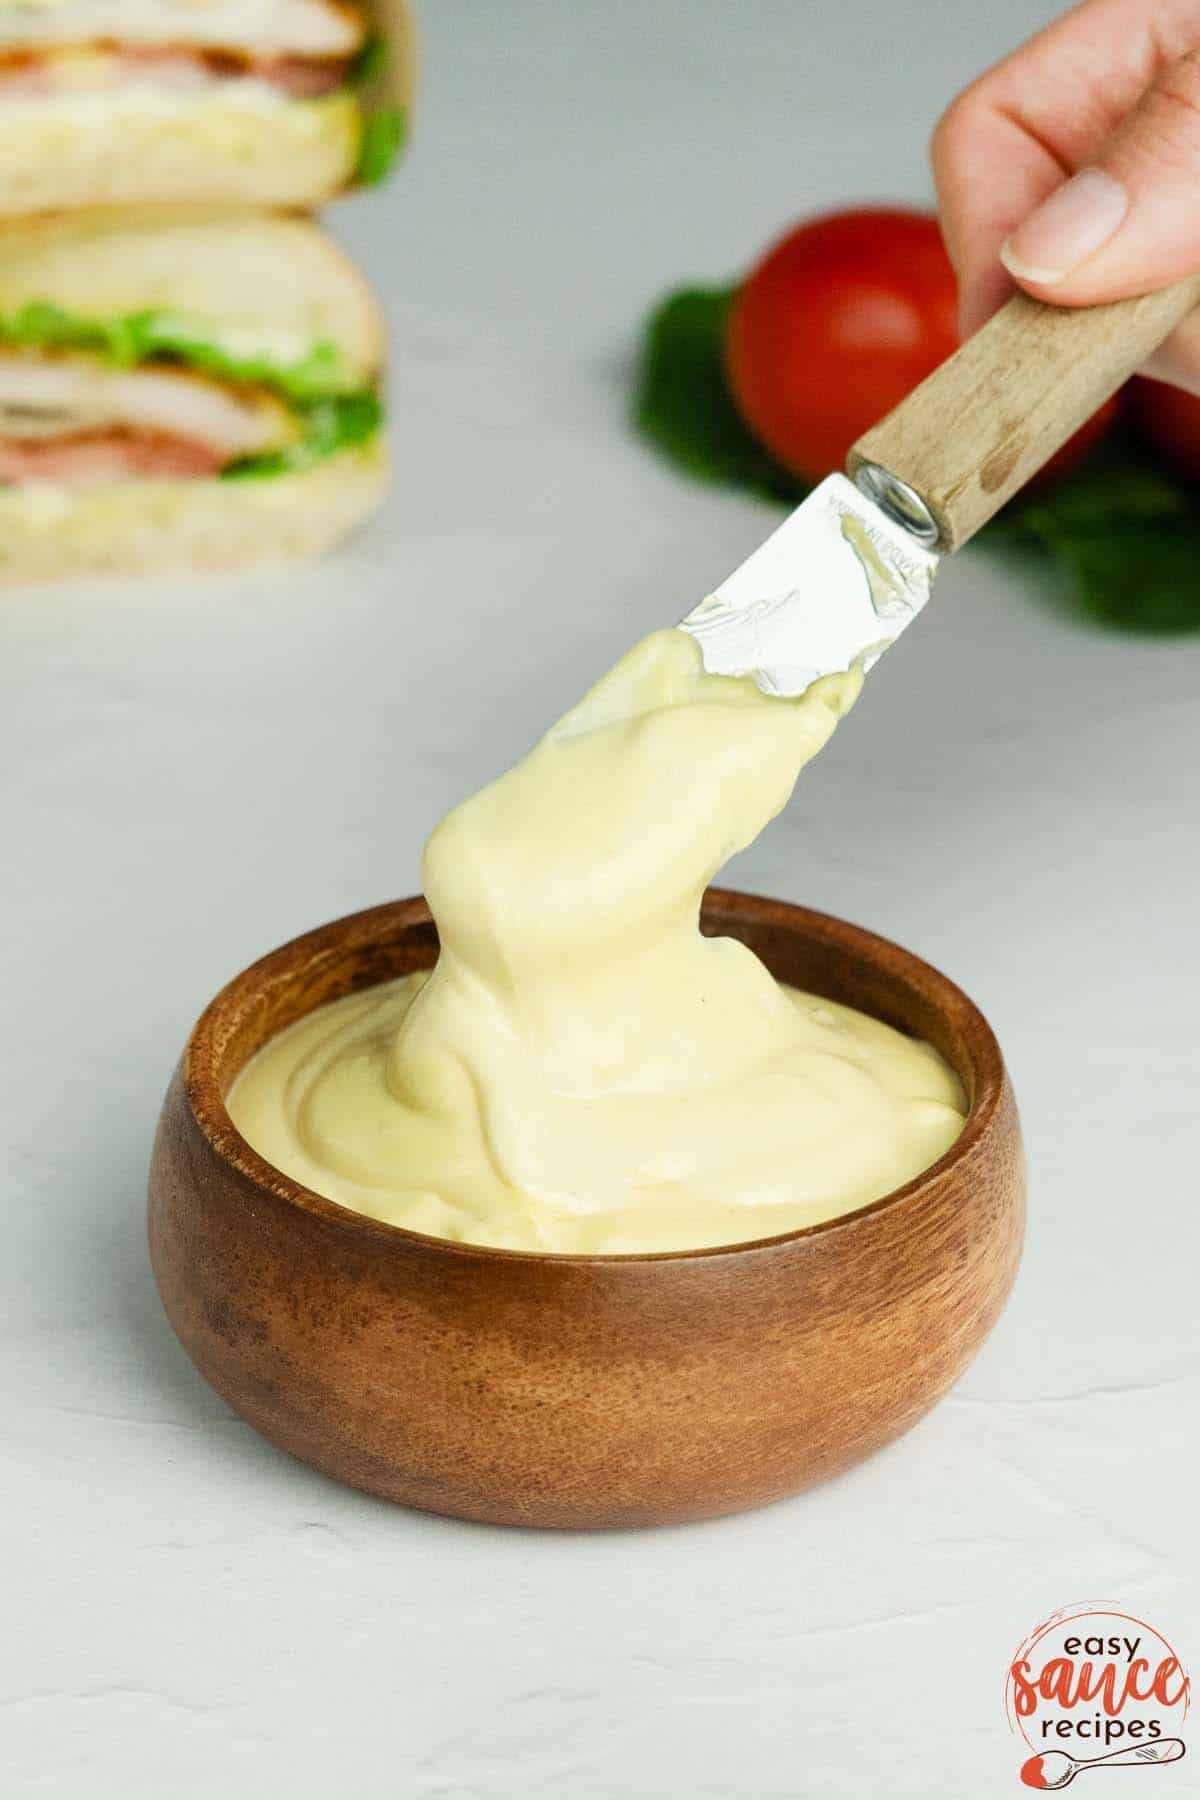 mayo mustard sauce in a small wooden bowl with a knife for spreading